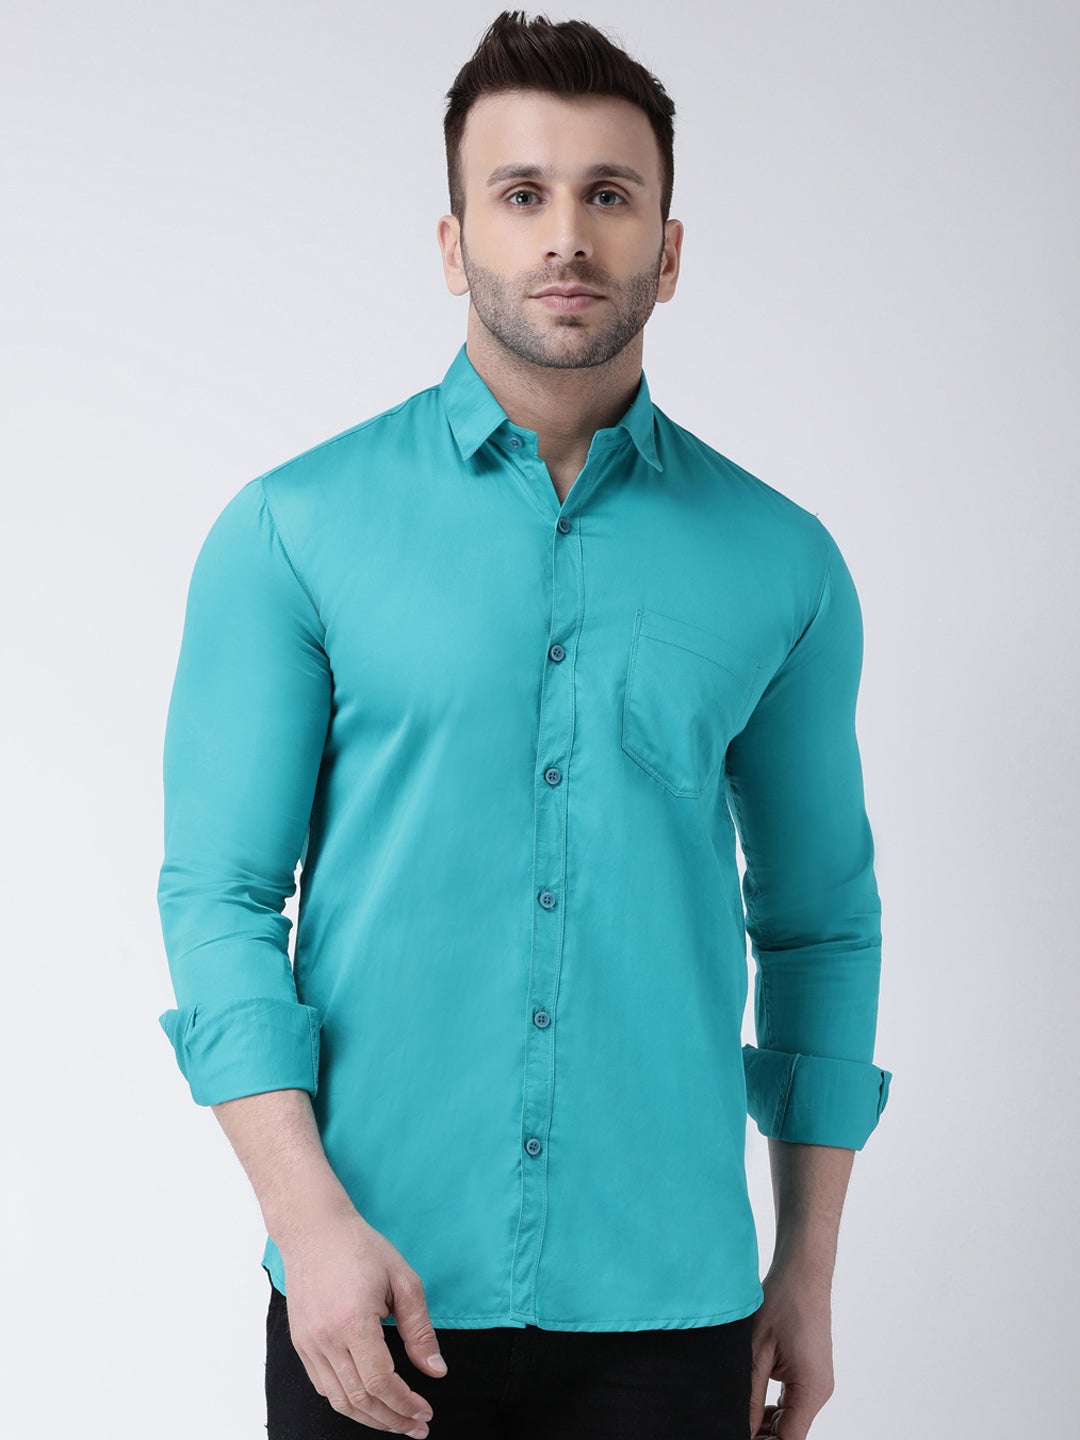 Men's Casual Turquoise Shirt